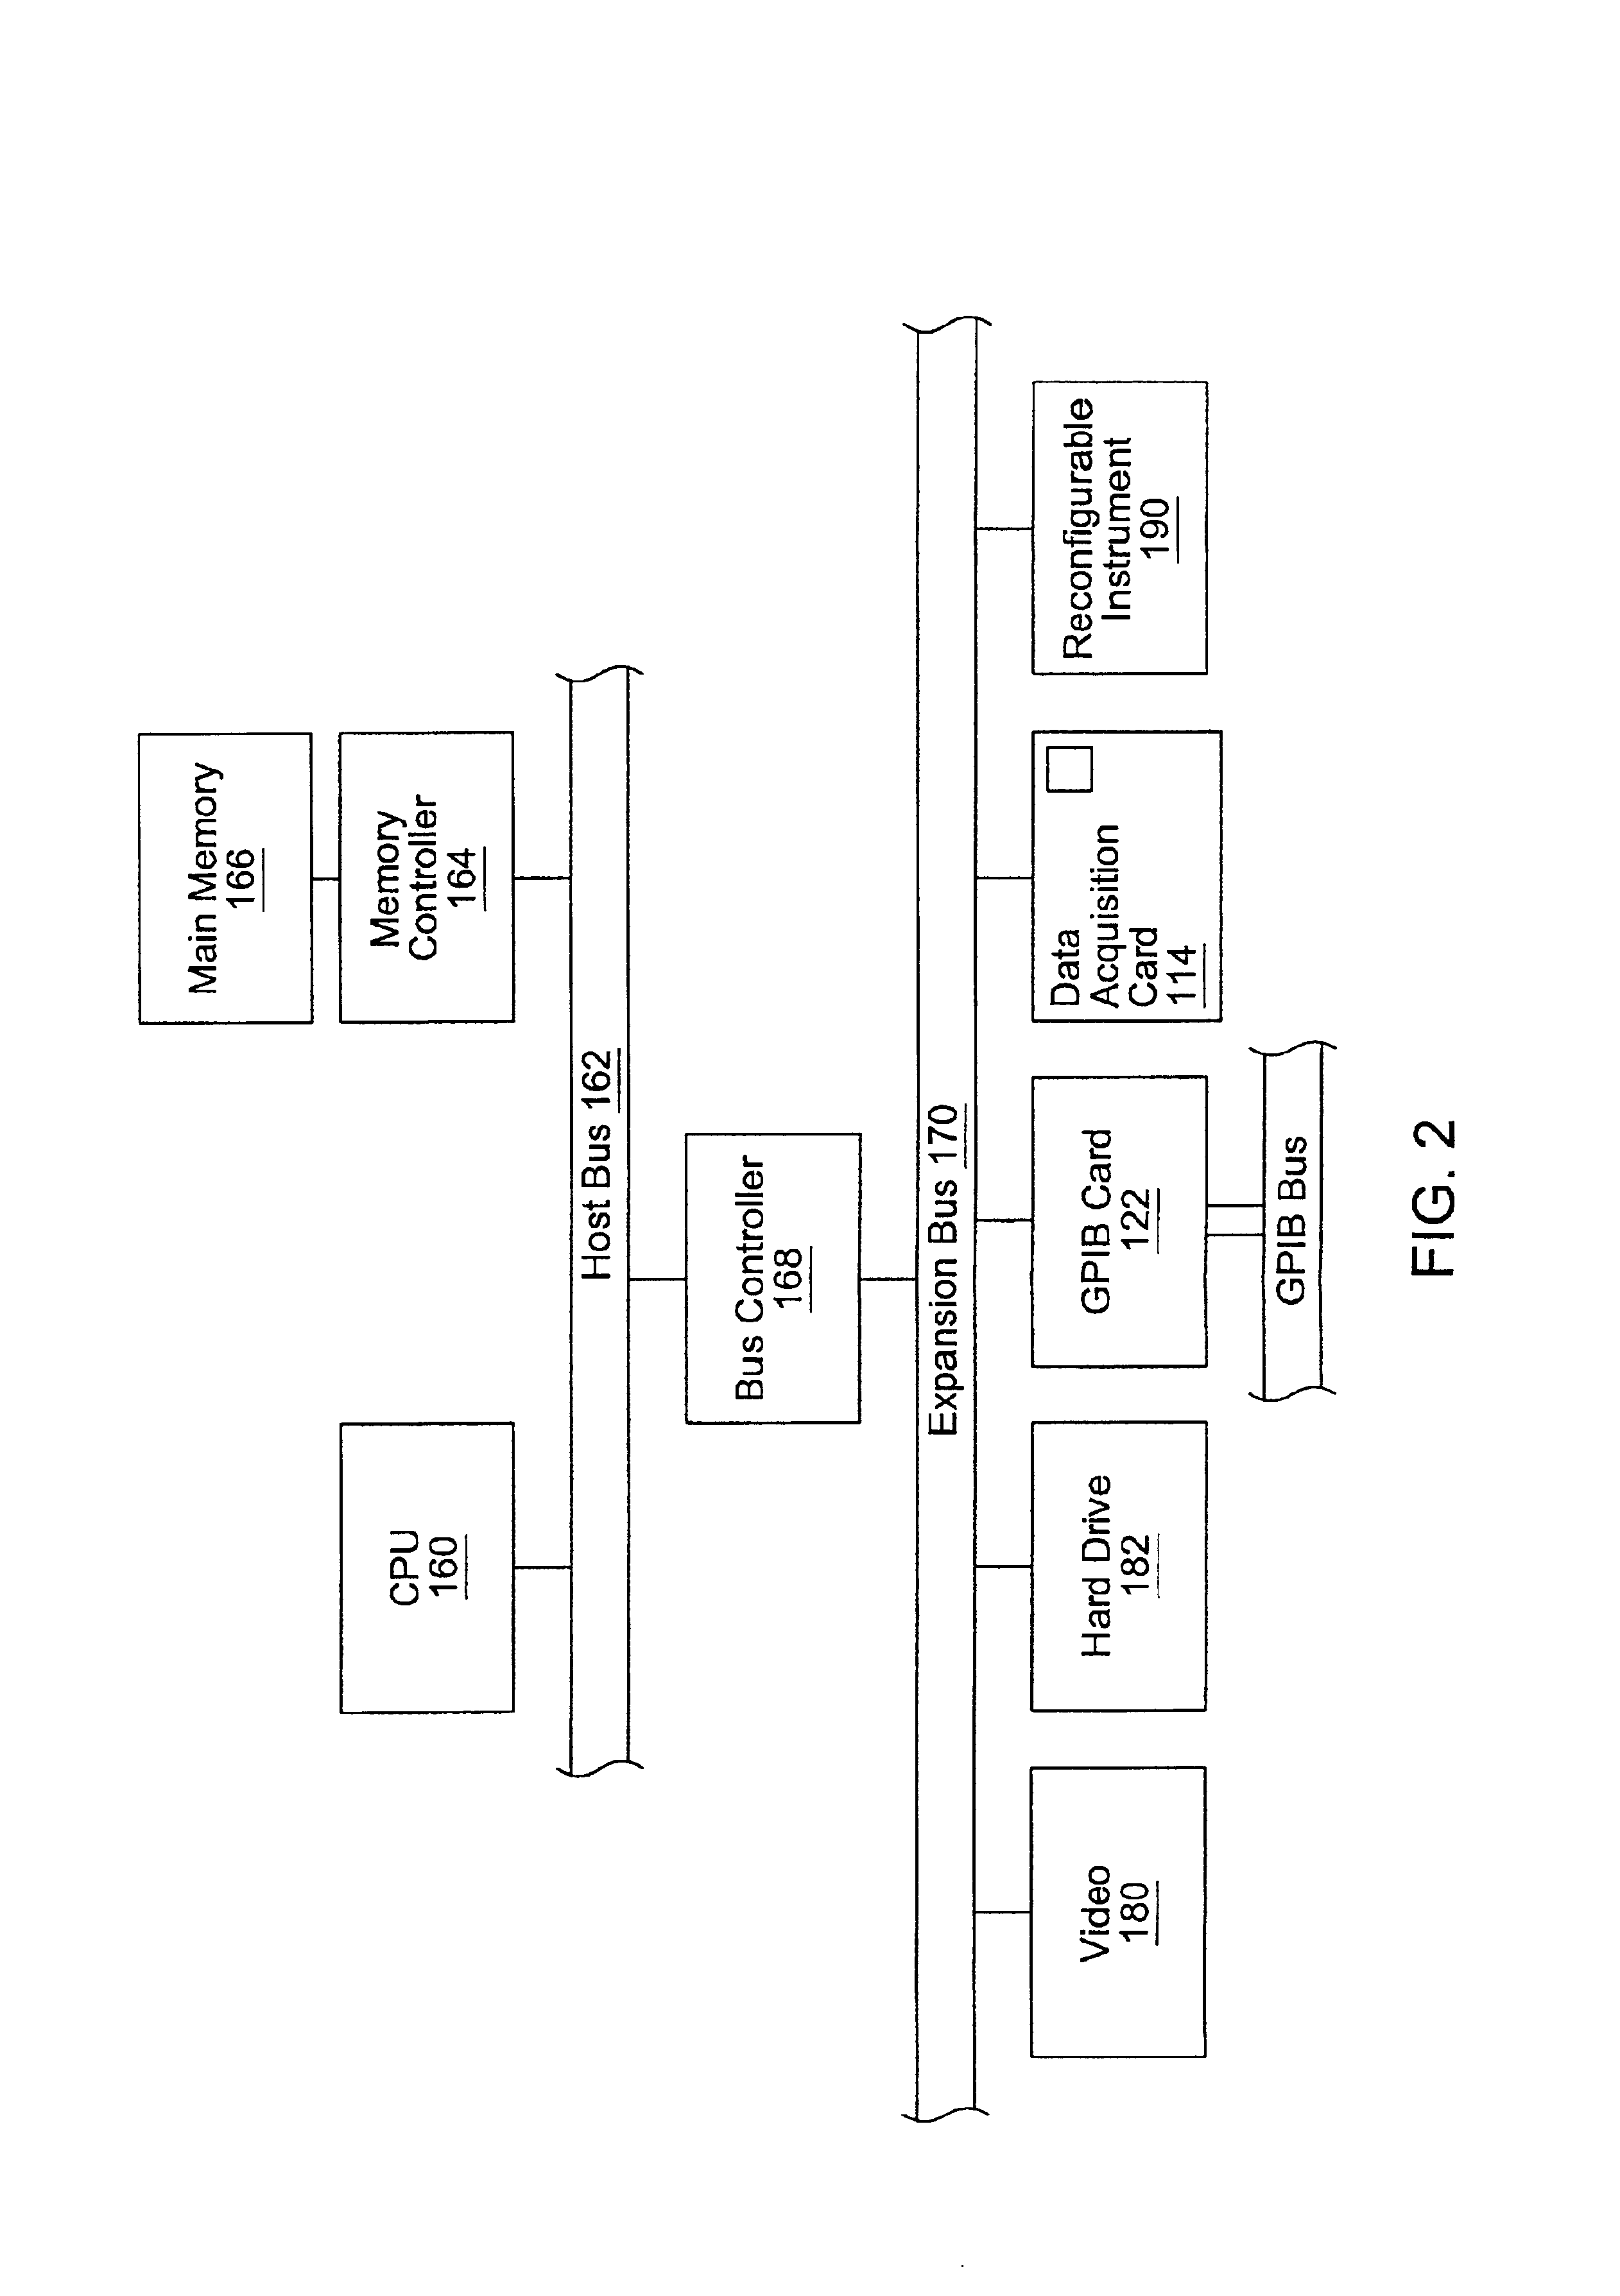 System and method enabling hierarchical execution of a test executive subsequence